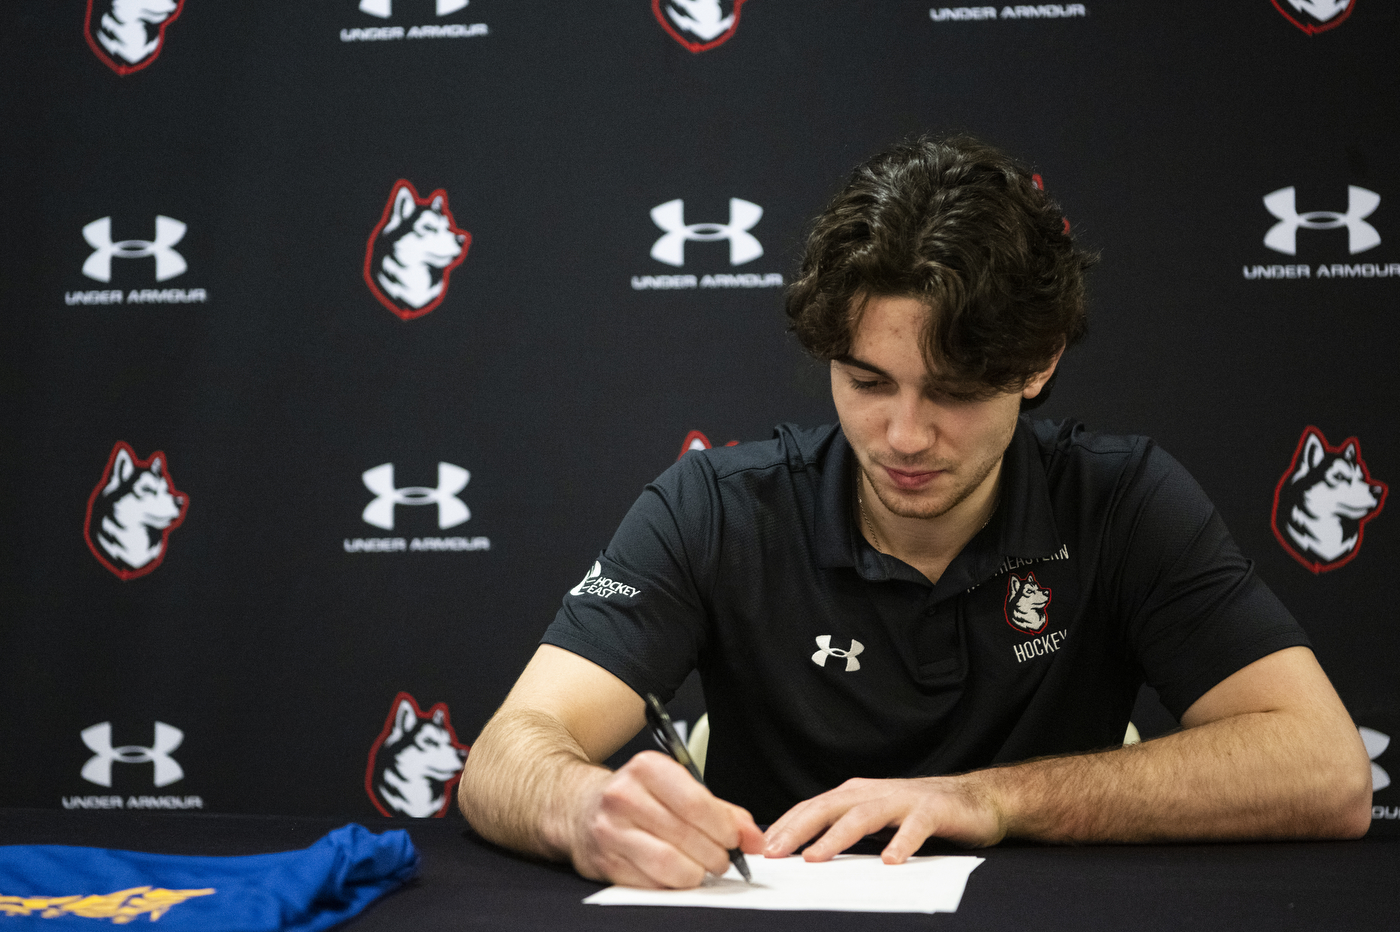 Devon seated in front of a Huskies backdrop, signing the contract